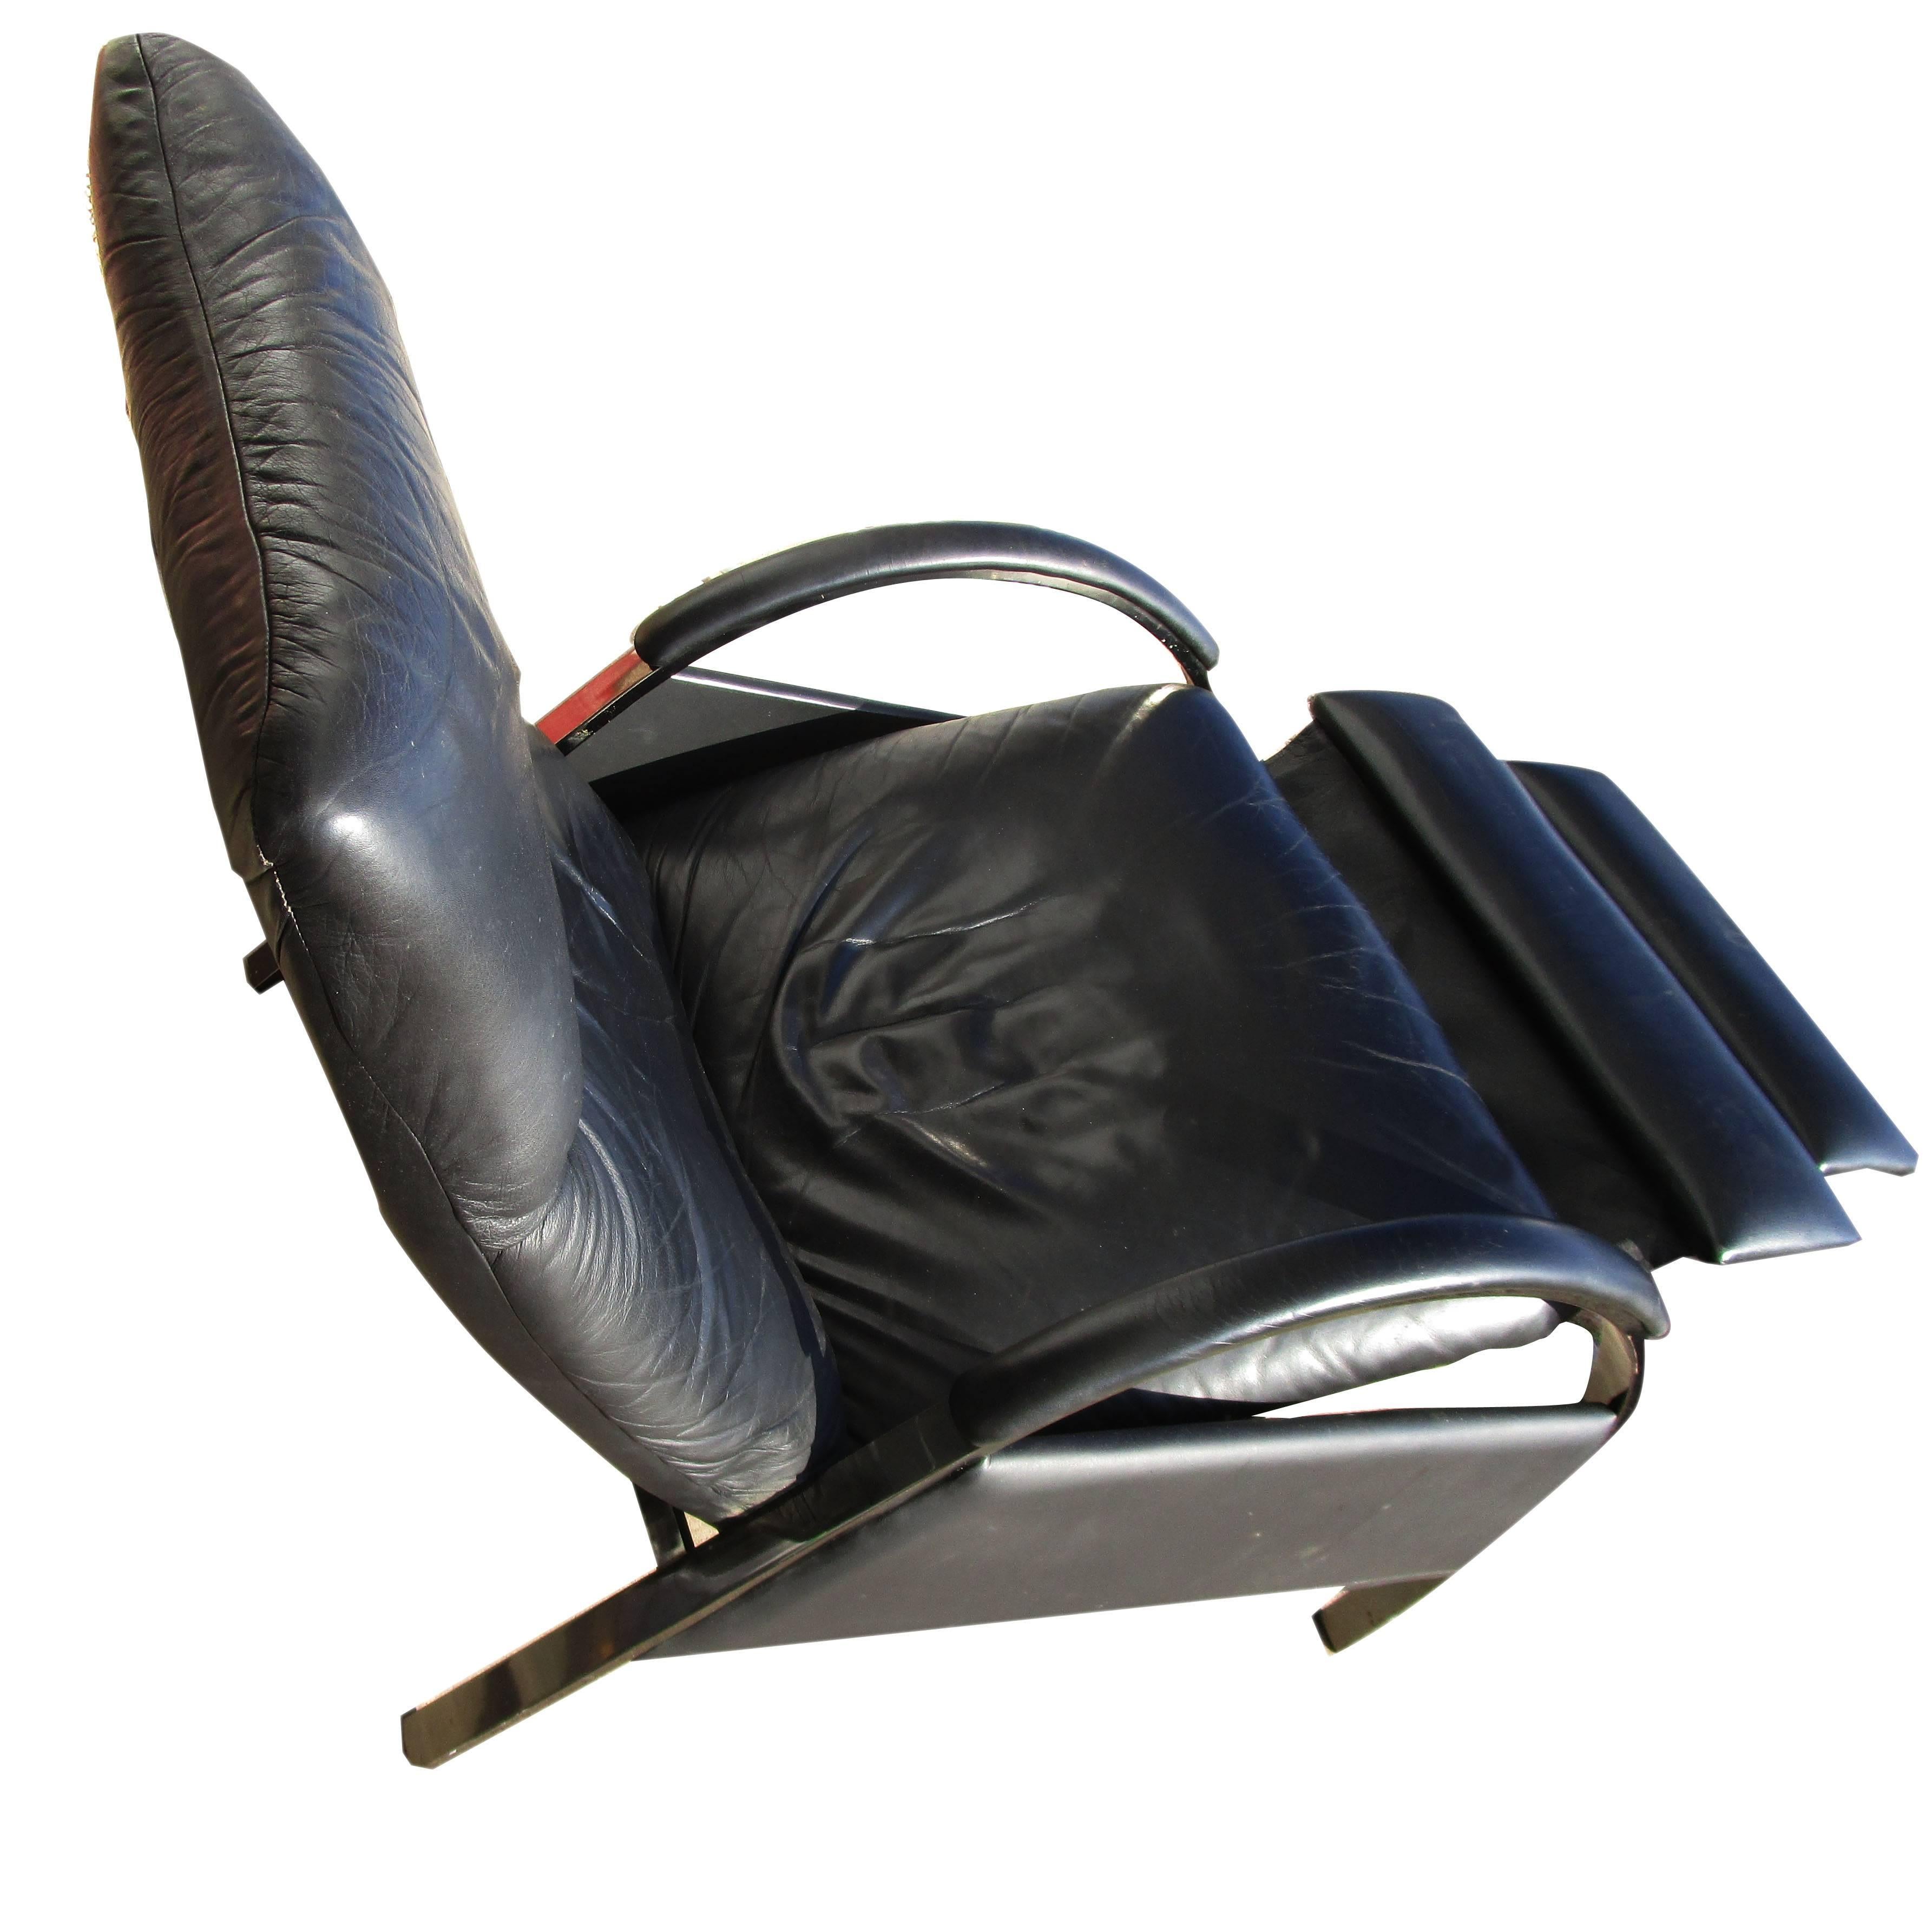 Three position reclining leather lounge armchair with swing out foot rest
designed by George Mulhauser for Design Institute of America
1980s.
         